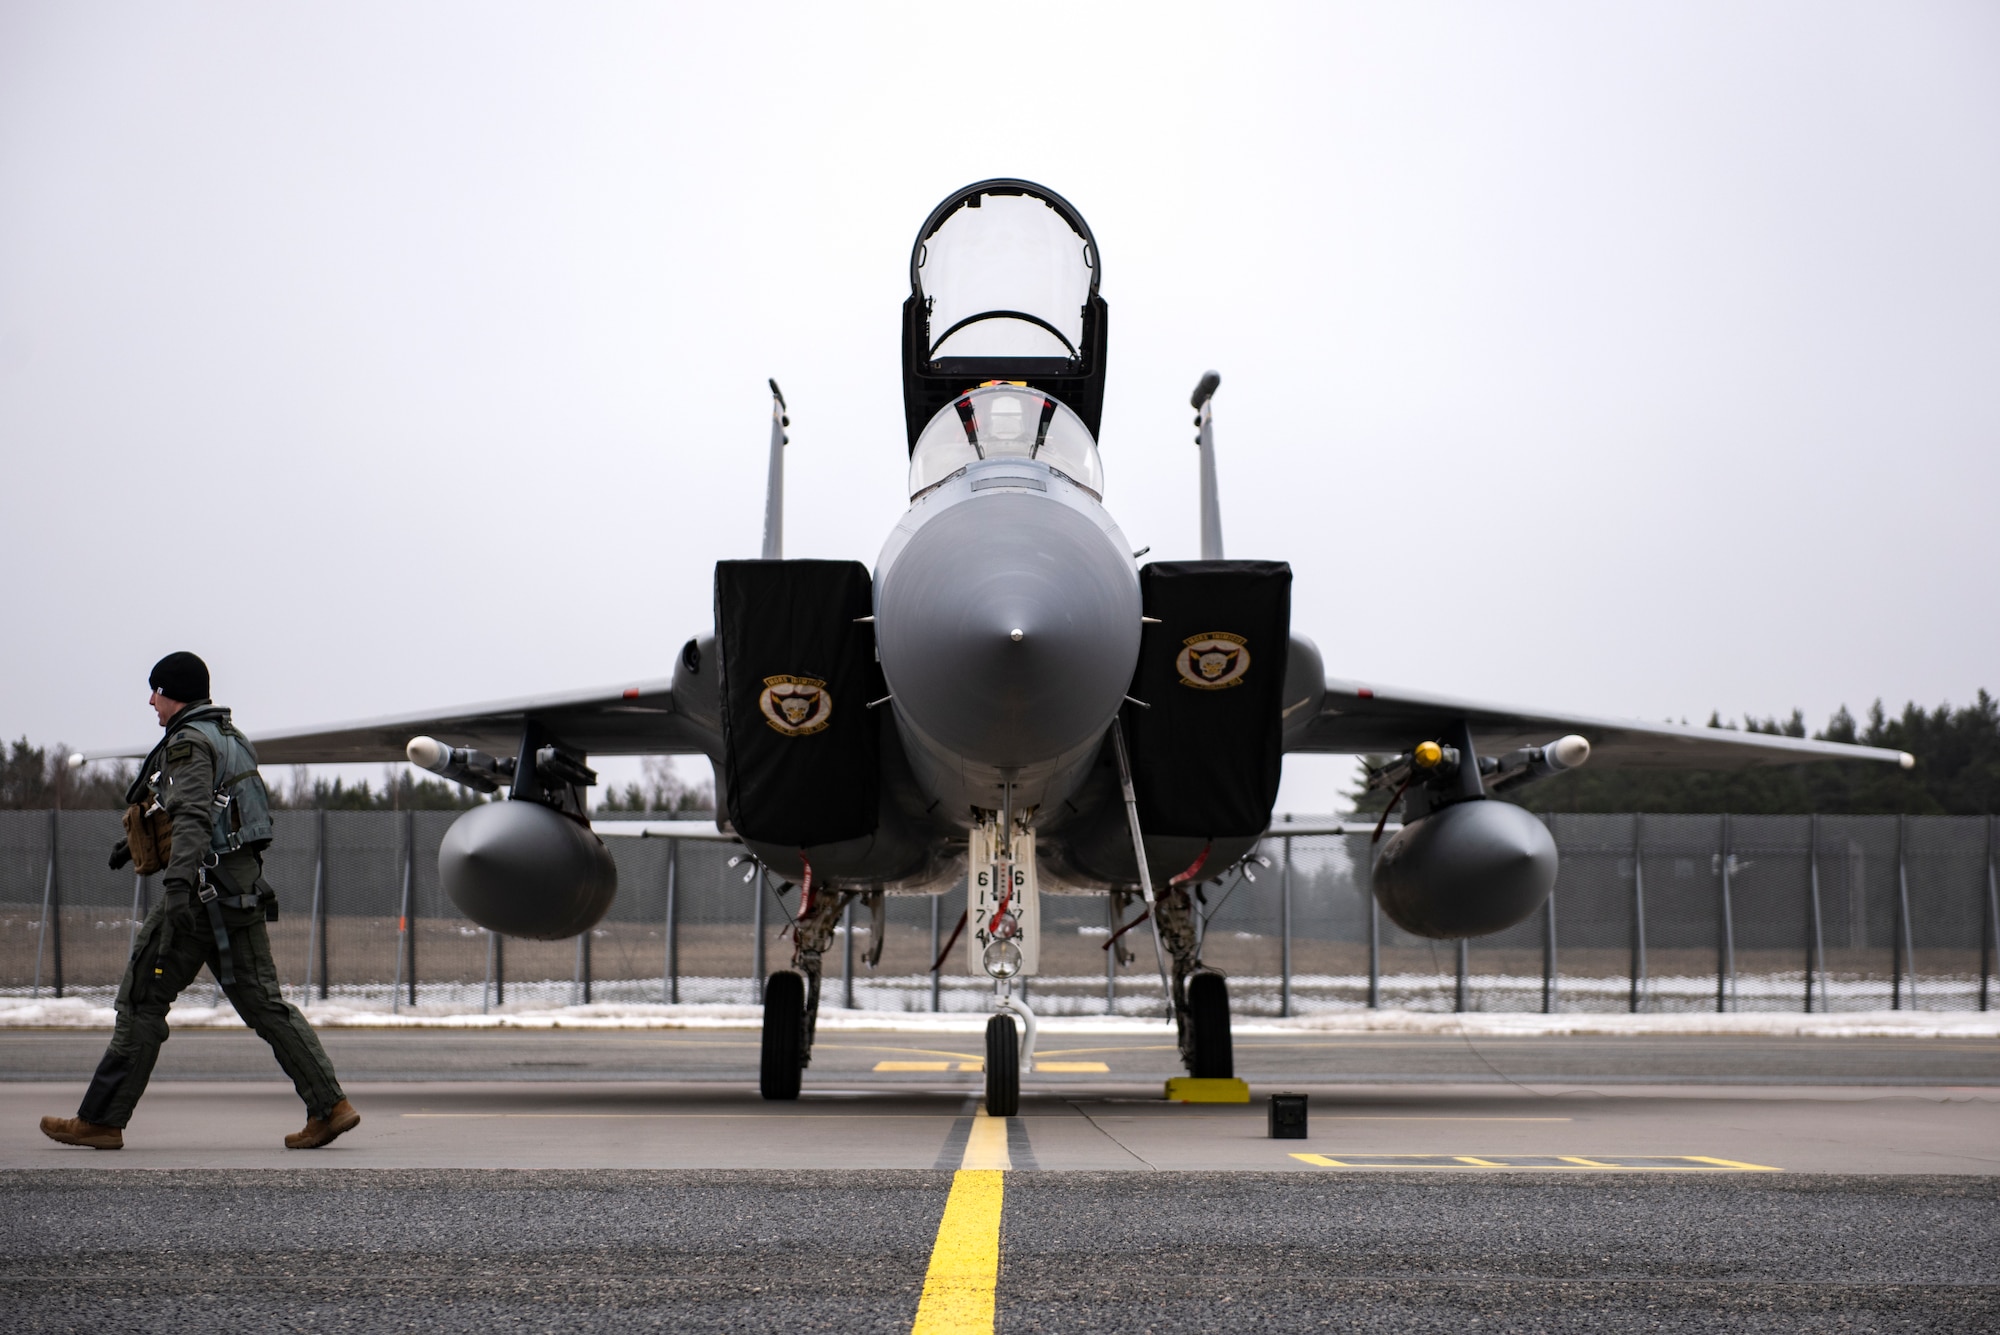 An F-15C Eagle assigned to the 493rd Fighter Squadron sits on the apron after arriving at Amari Air Base, Estonia, in support of Exercise Baltic Trident, March 15, 2021. Exercises like this strengthen interoperability with NATO allies and partner nations, and increase 48th FW sortie generation and sustainment capabilities away from home station through the application of Agile Combat Employment concepts. (U.S. Air Force photo by Airman 1st Class Jessi Monte)